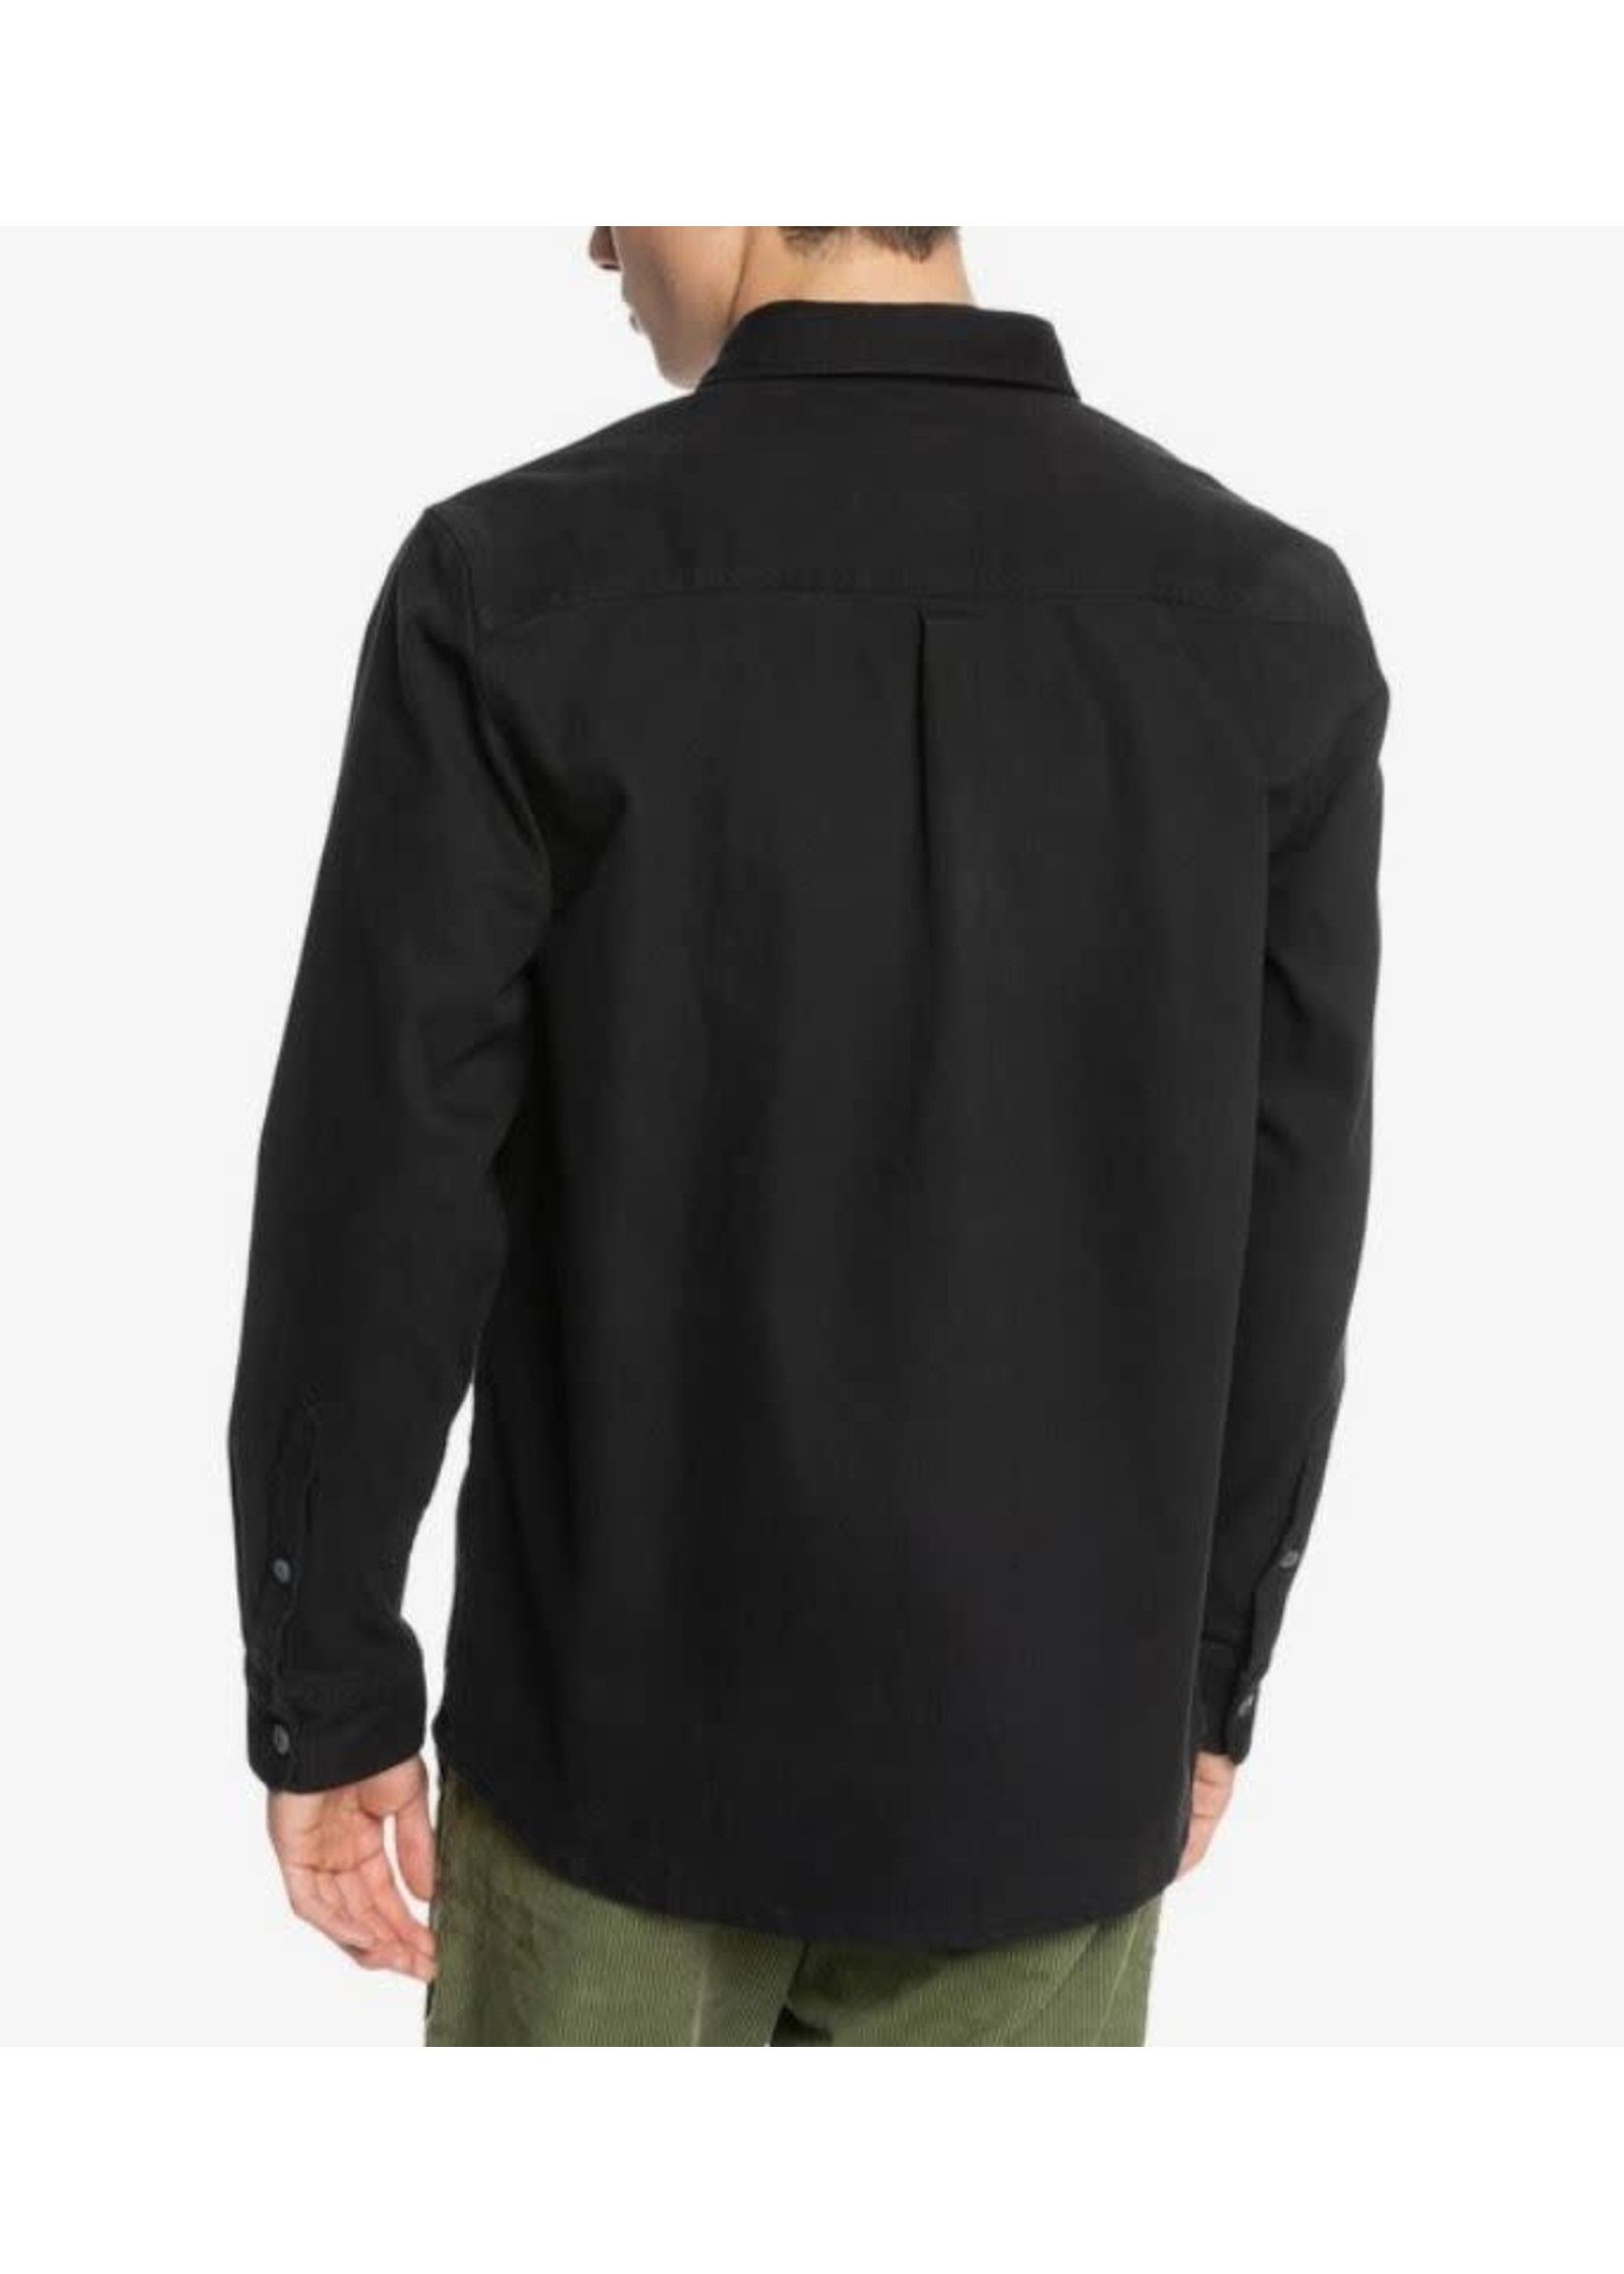 Quiksilver EADY LONG SLEEVE STRETCHY JACKET